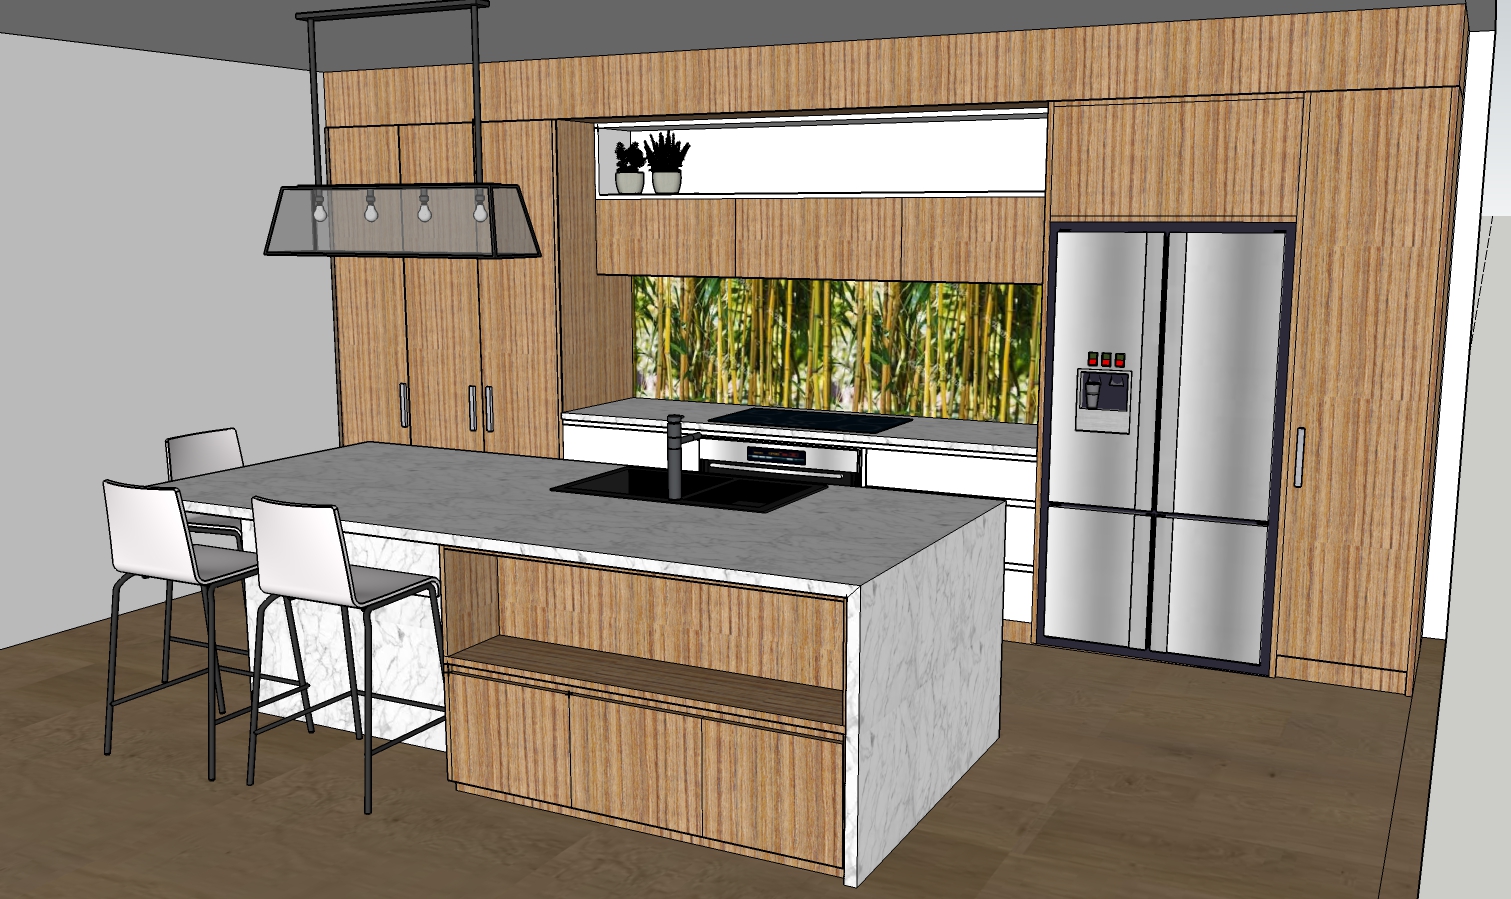 sketchup 3d warehouse to kitchendraw